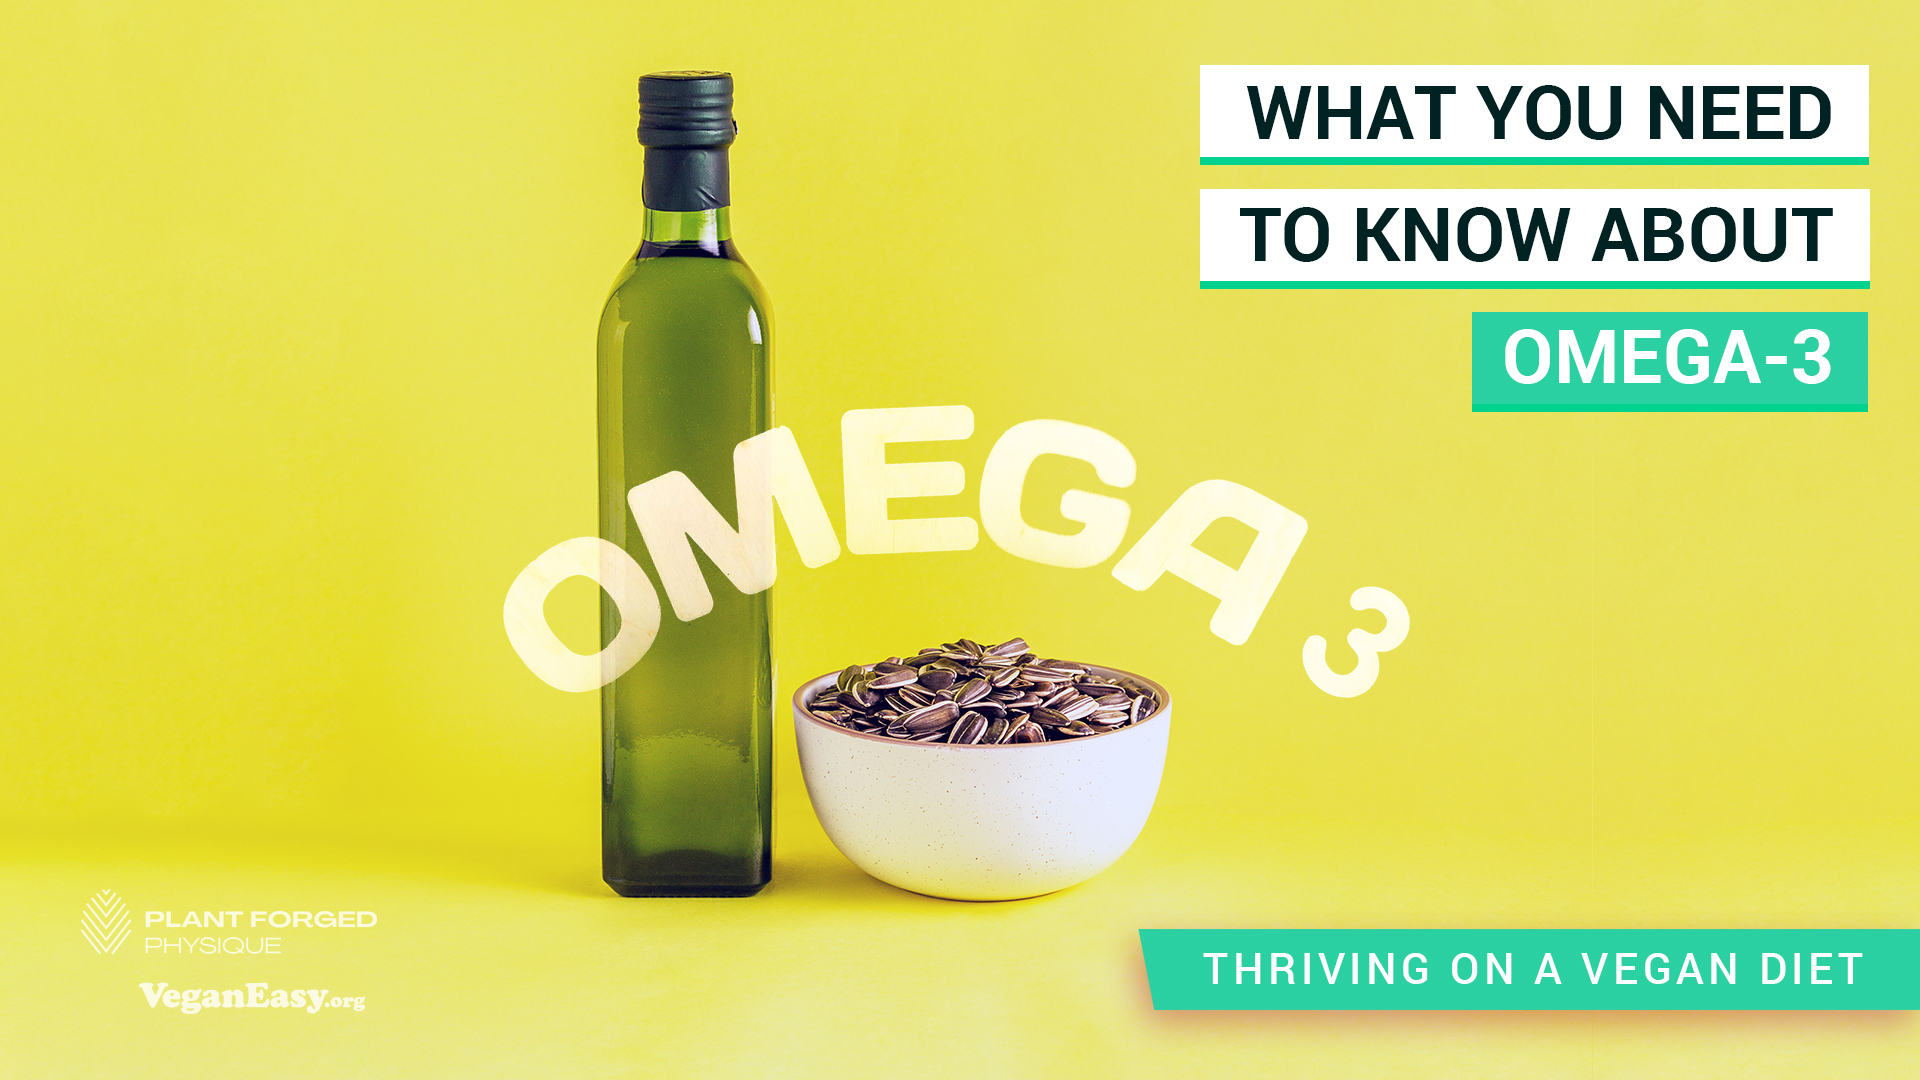 What you need to know about Omega-3s